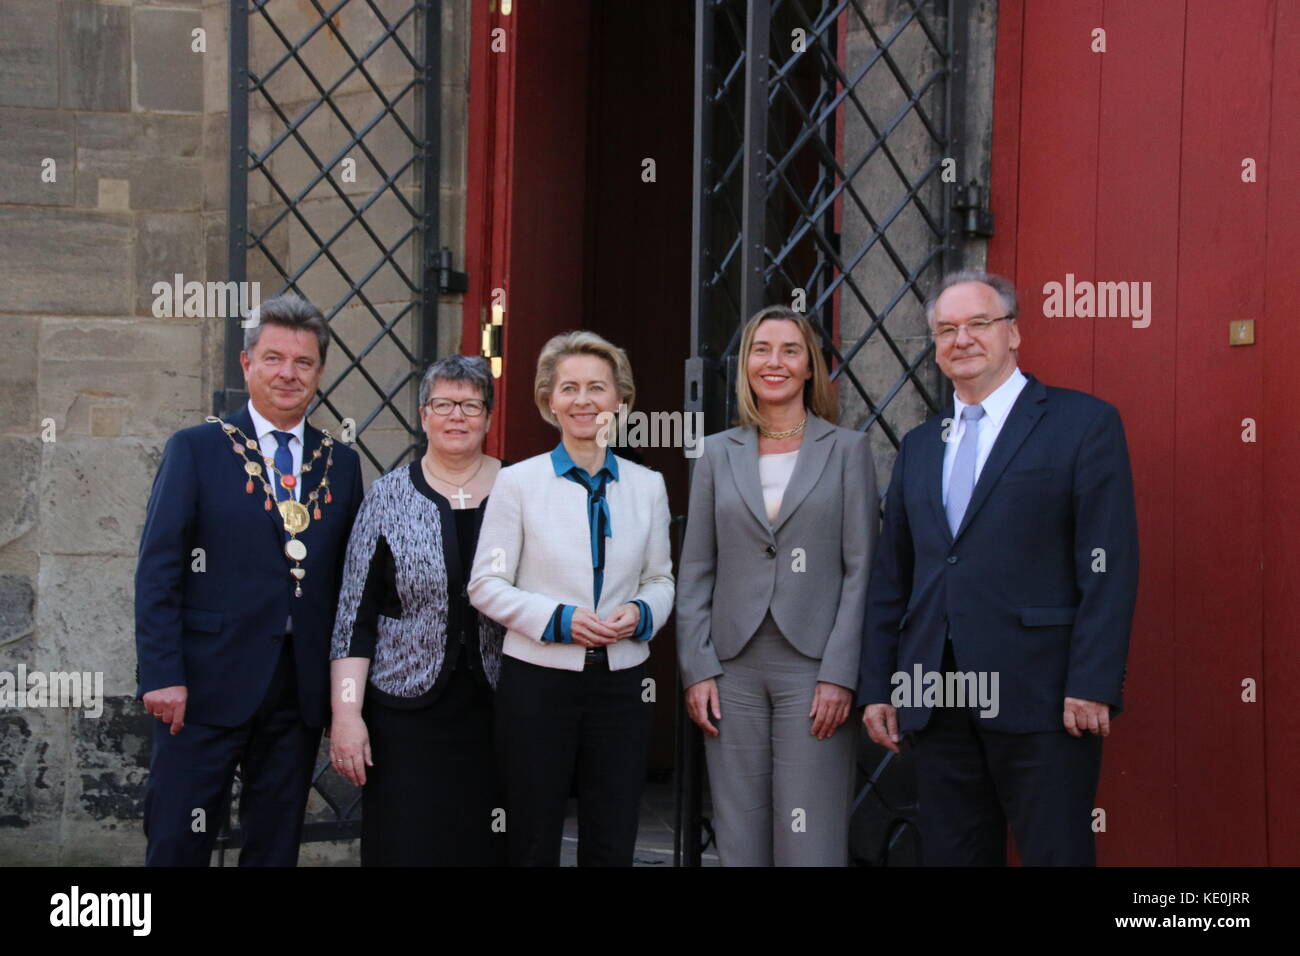 Magdeburg, Germany. 17th Oct, 2017. Federica Mogherini, Vice-President of the European Commission and the current High Representative of the European Union for Foreign Affairs and Security Policy, is honored with the Emperor Otto Prize in the cathedral of Magdeburg. Credit: Mattis Kaminer/Alamy Live News Stock Photo